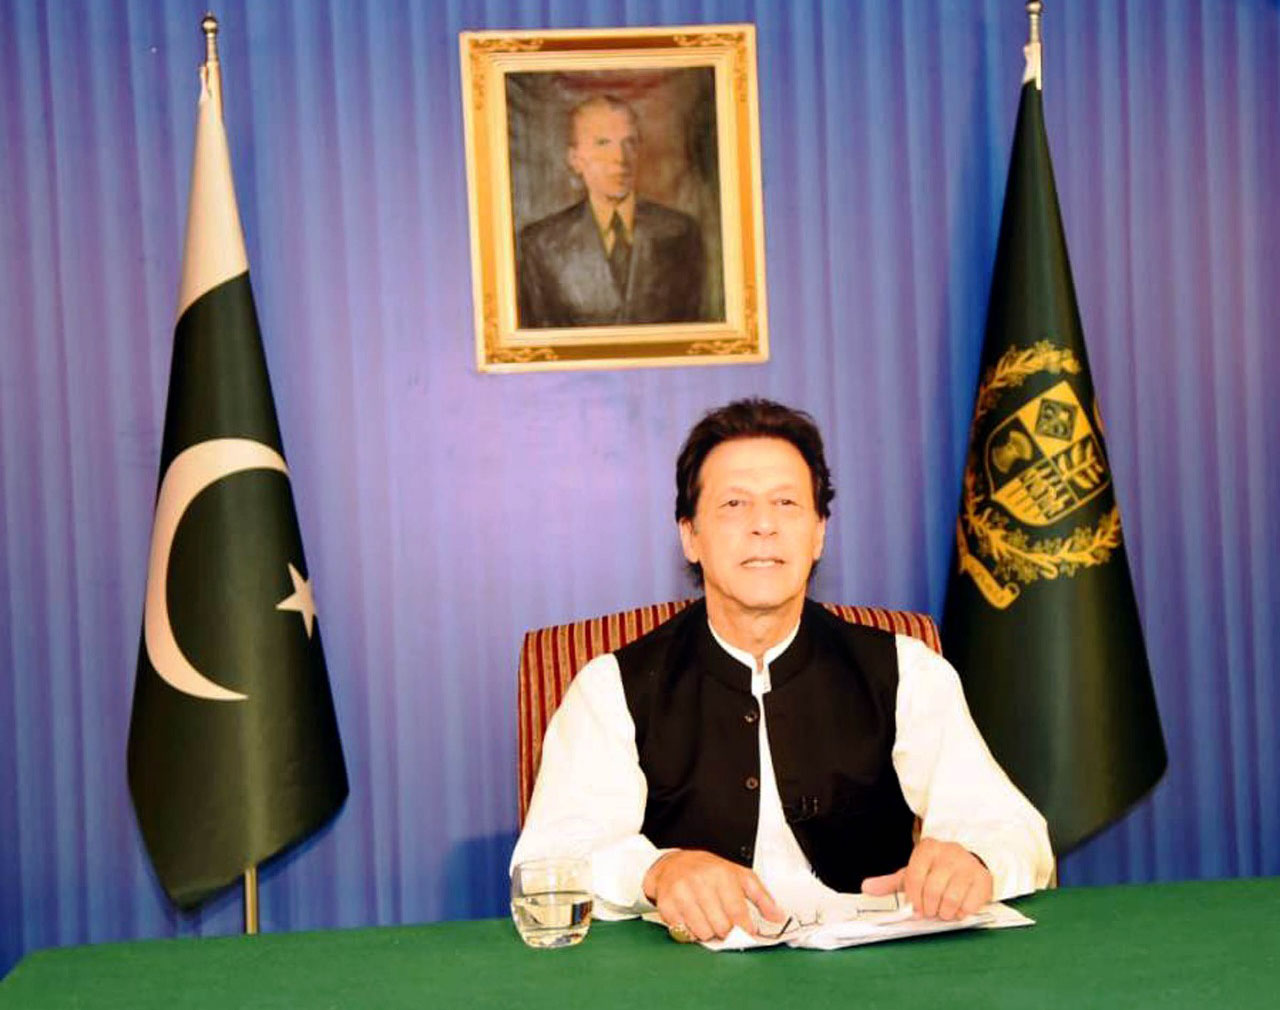 Prime Minister Imran Khan delivering his inaugural address to the nation 